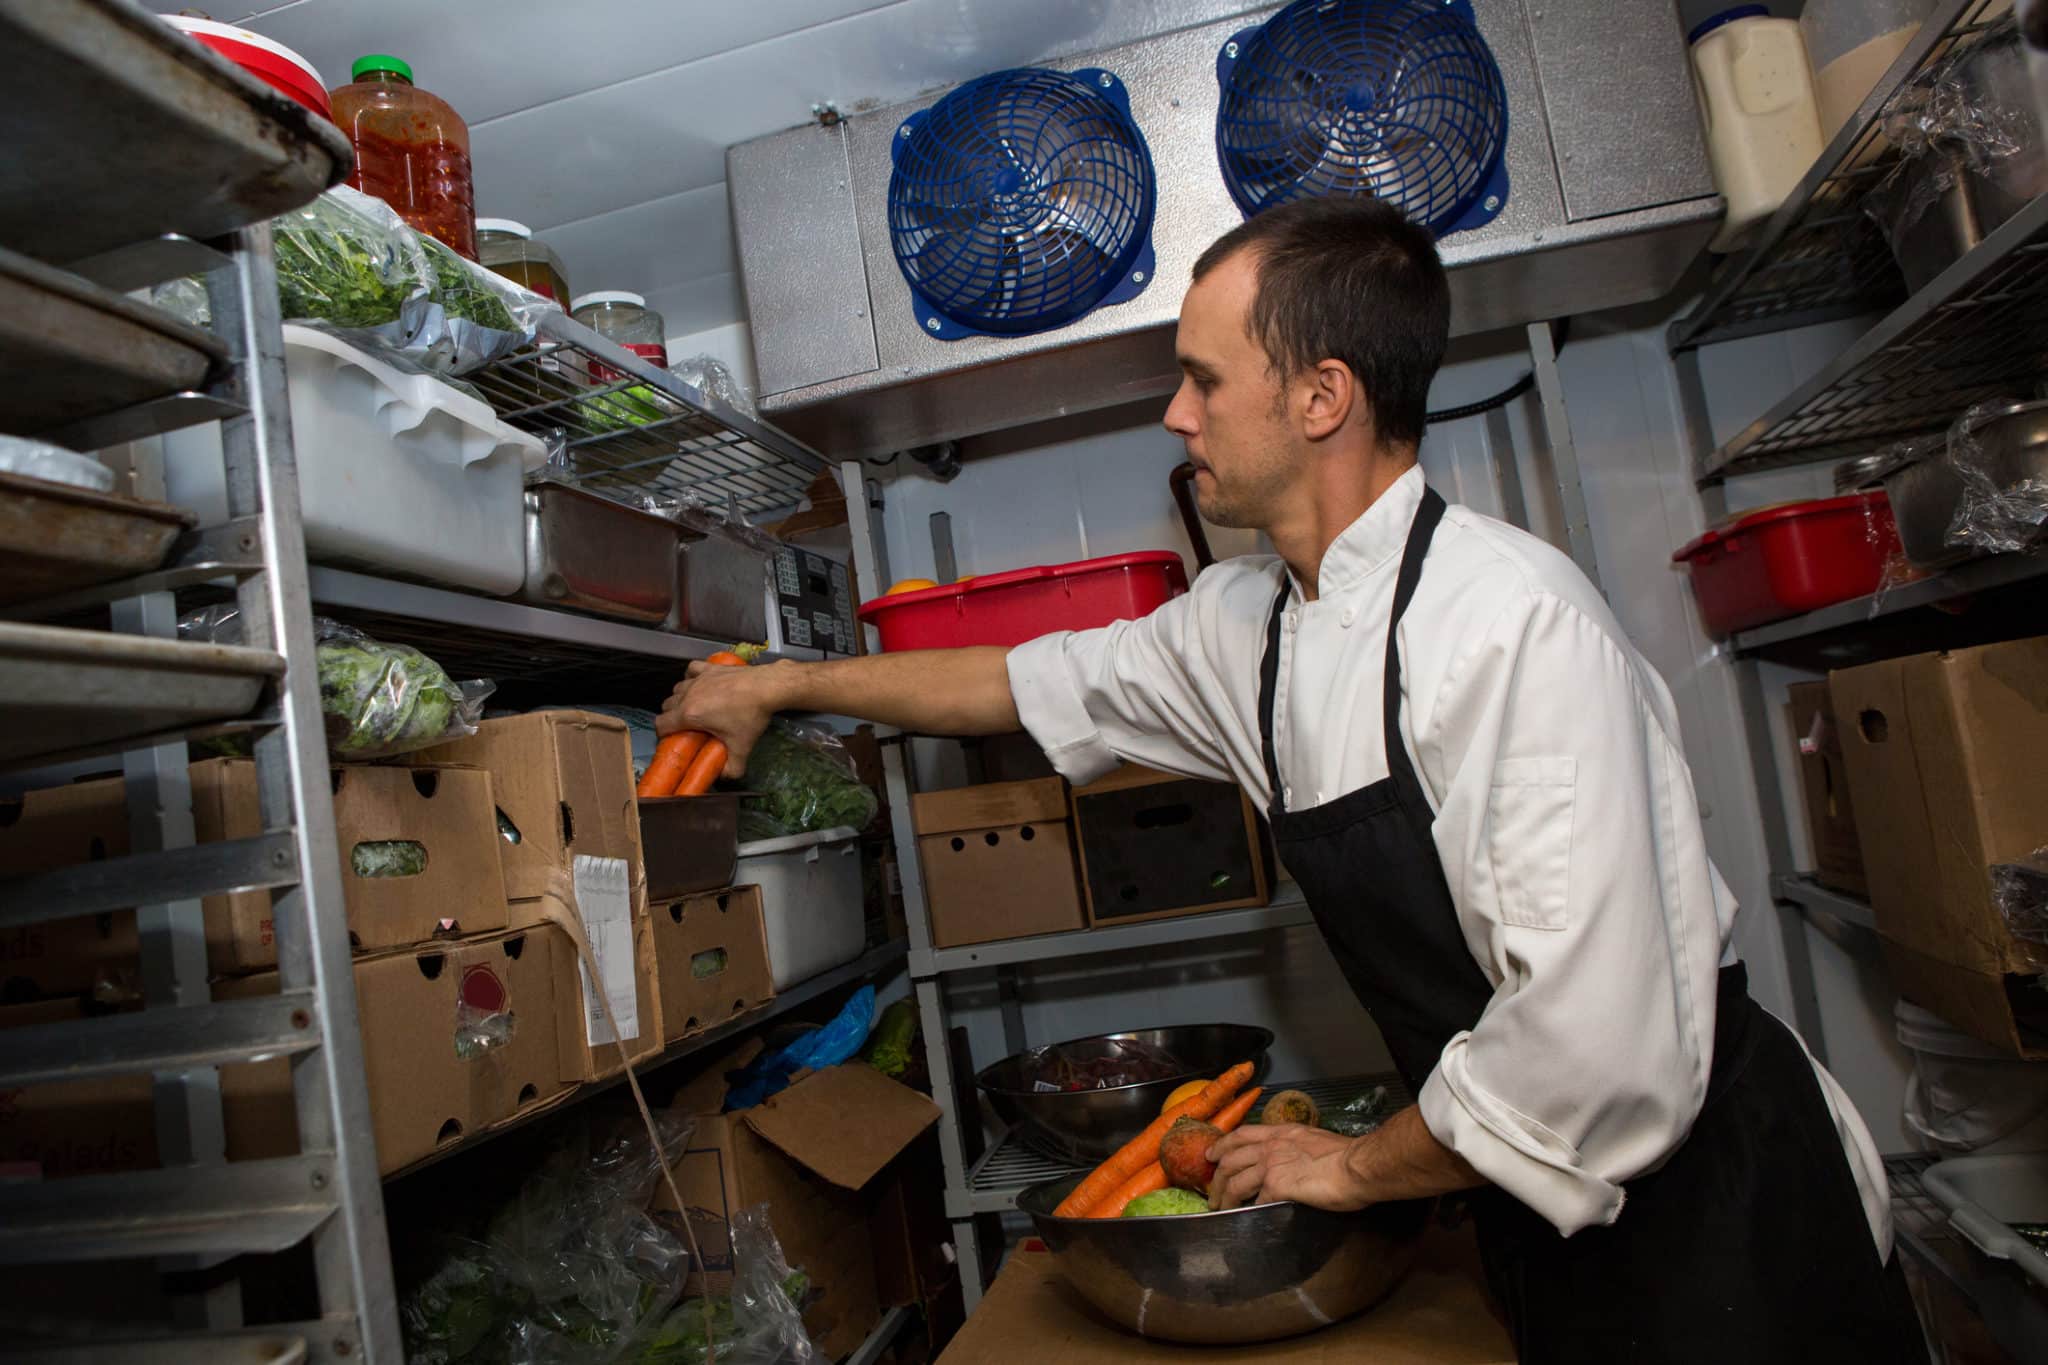 inventory management is one of the more impactful restaurant business expenses